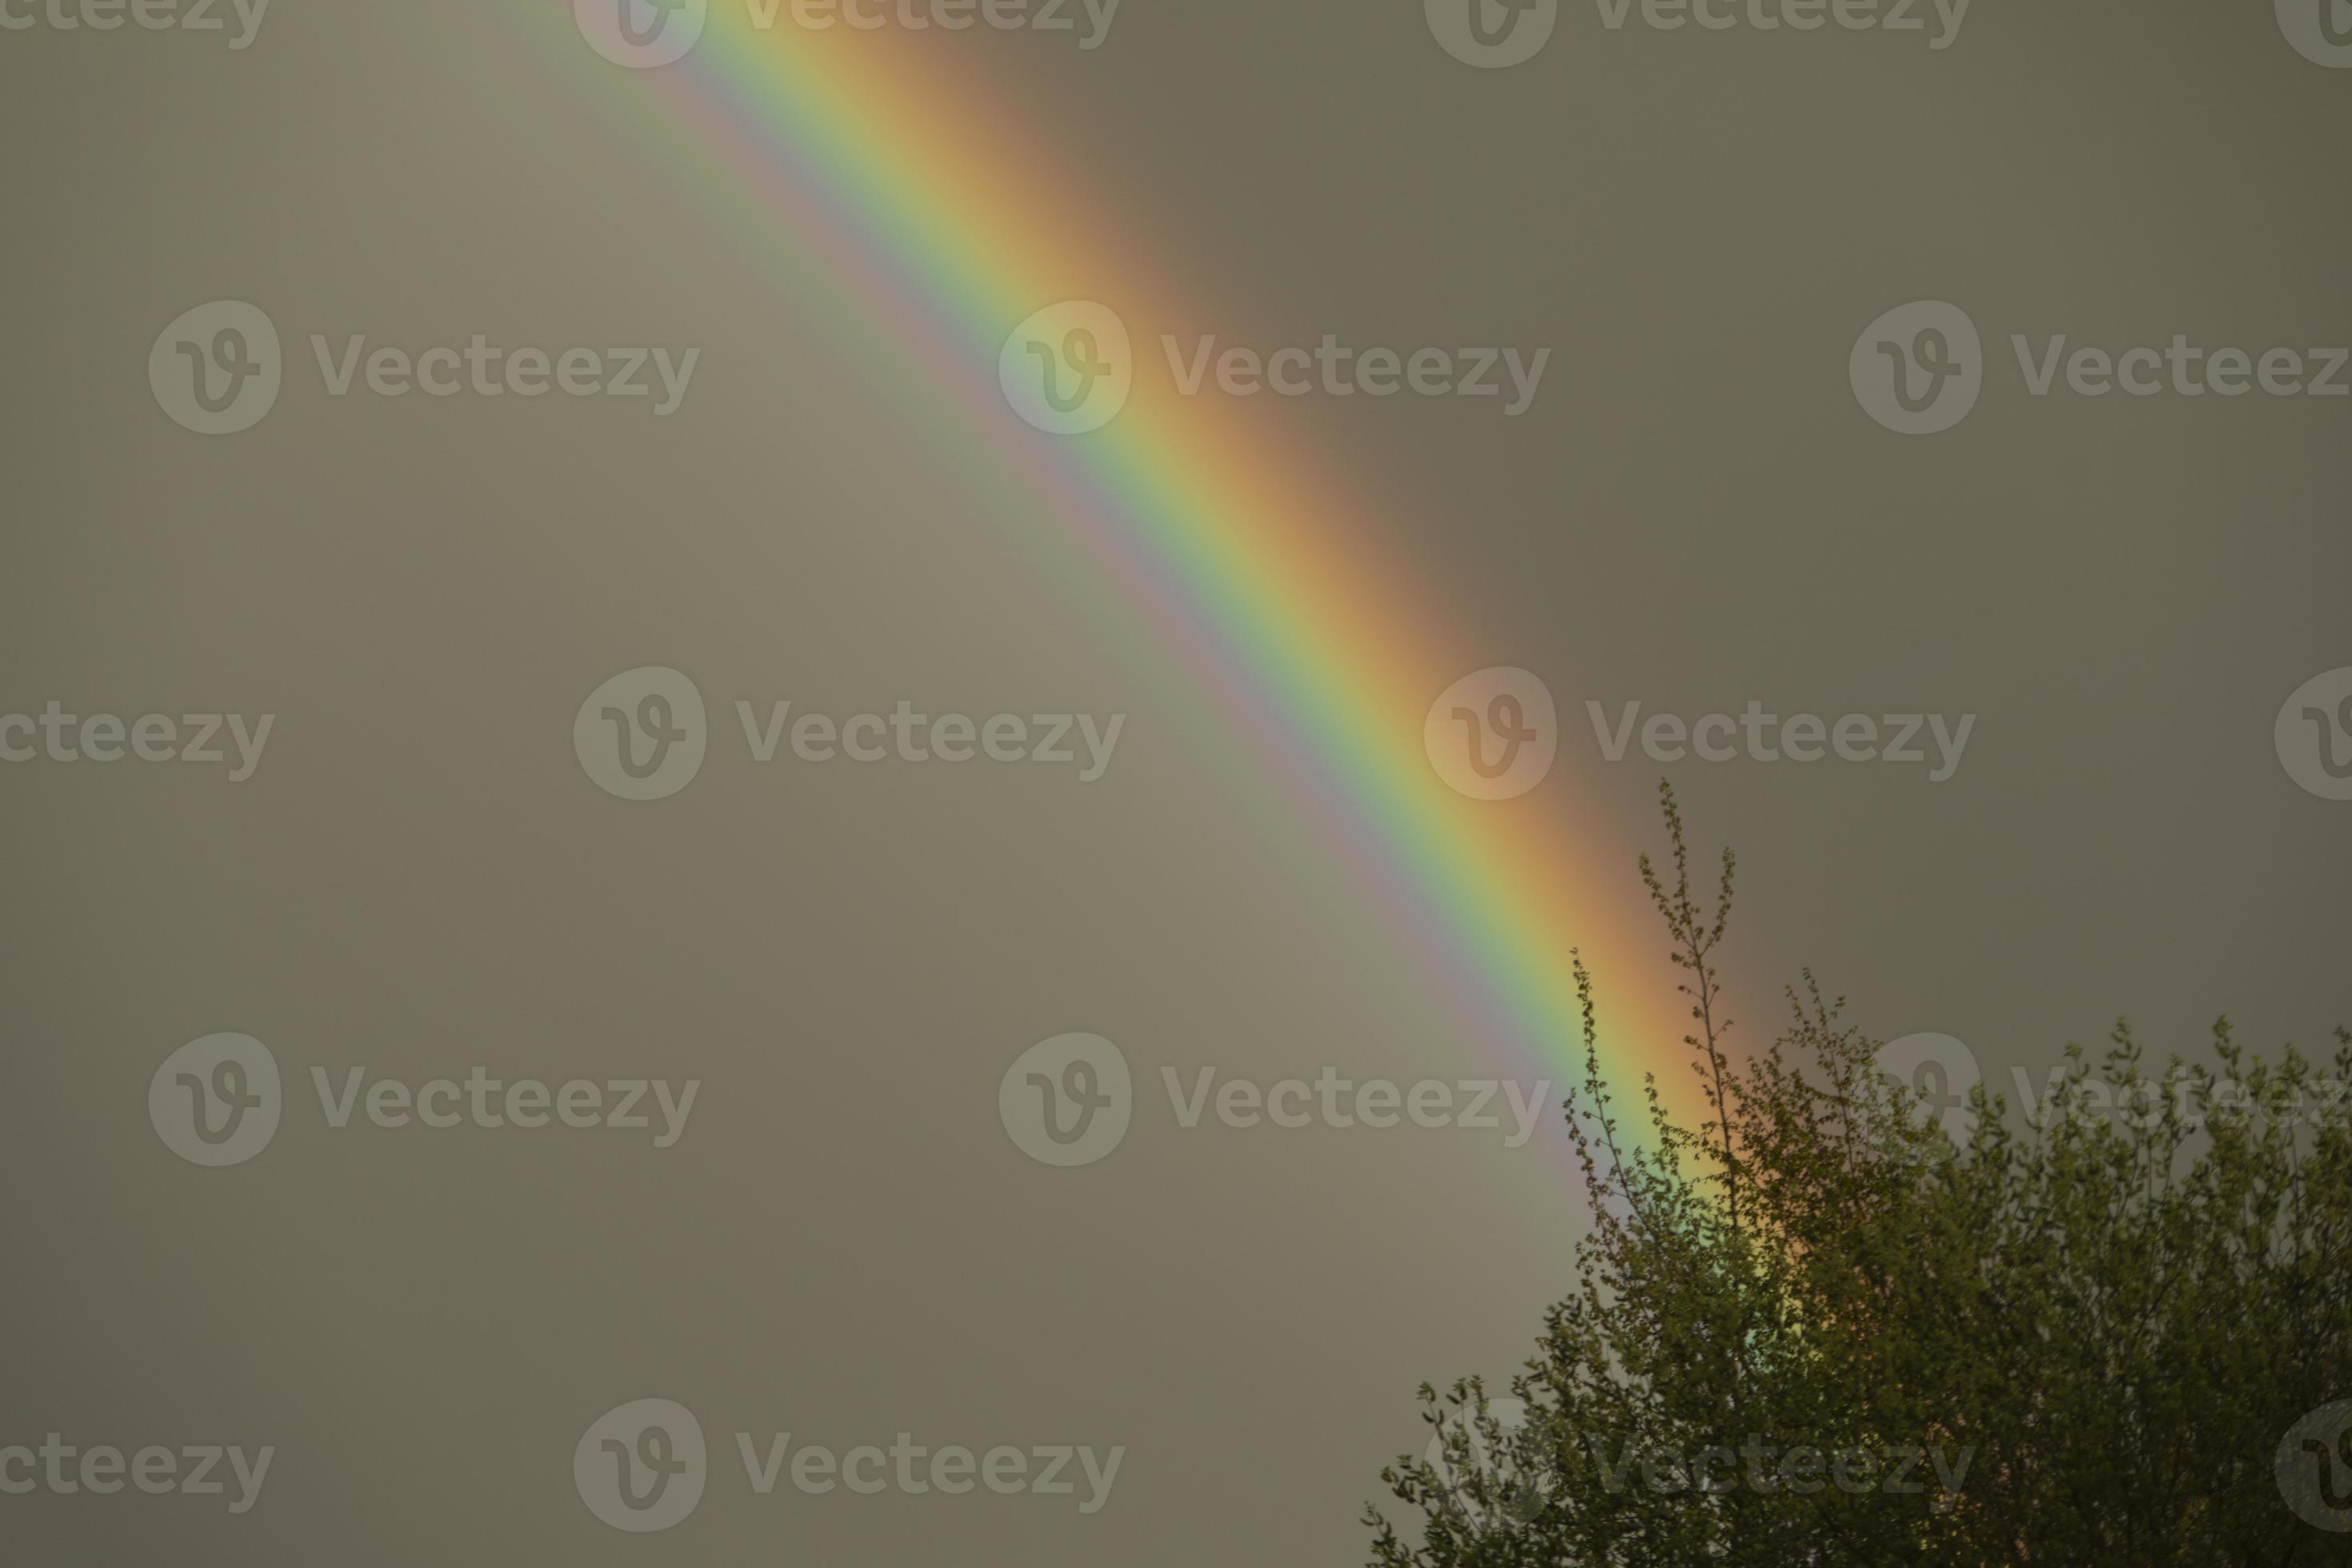 What are the colours of the rainbow? - Met Office